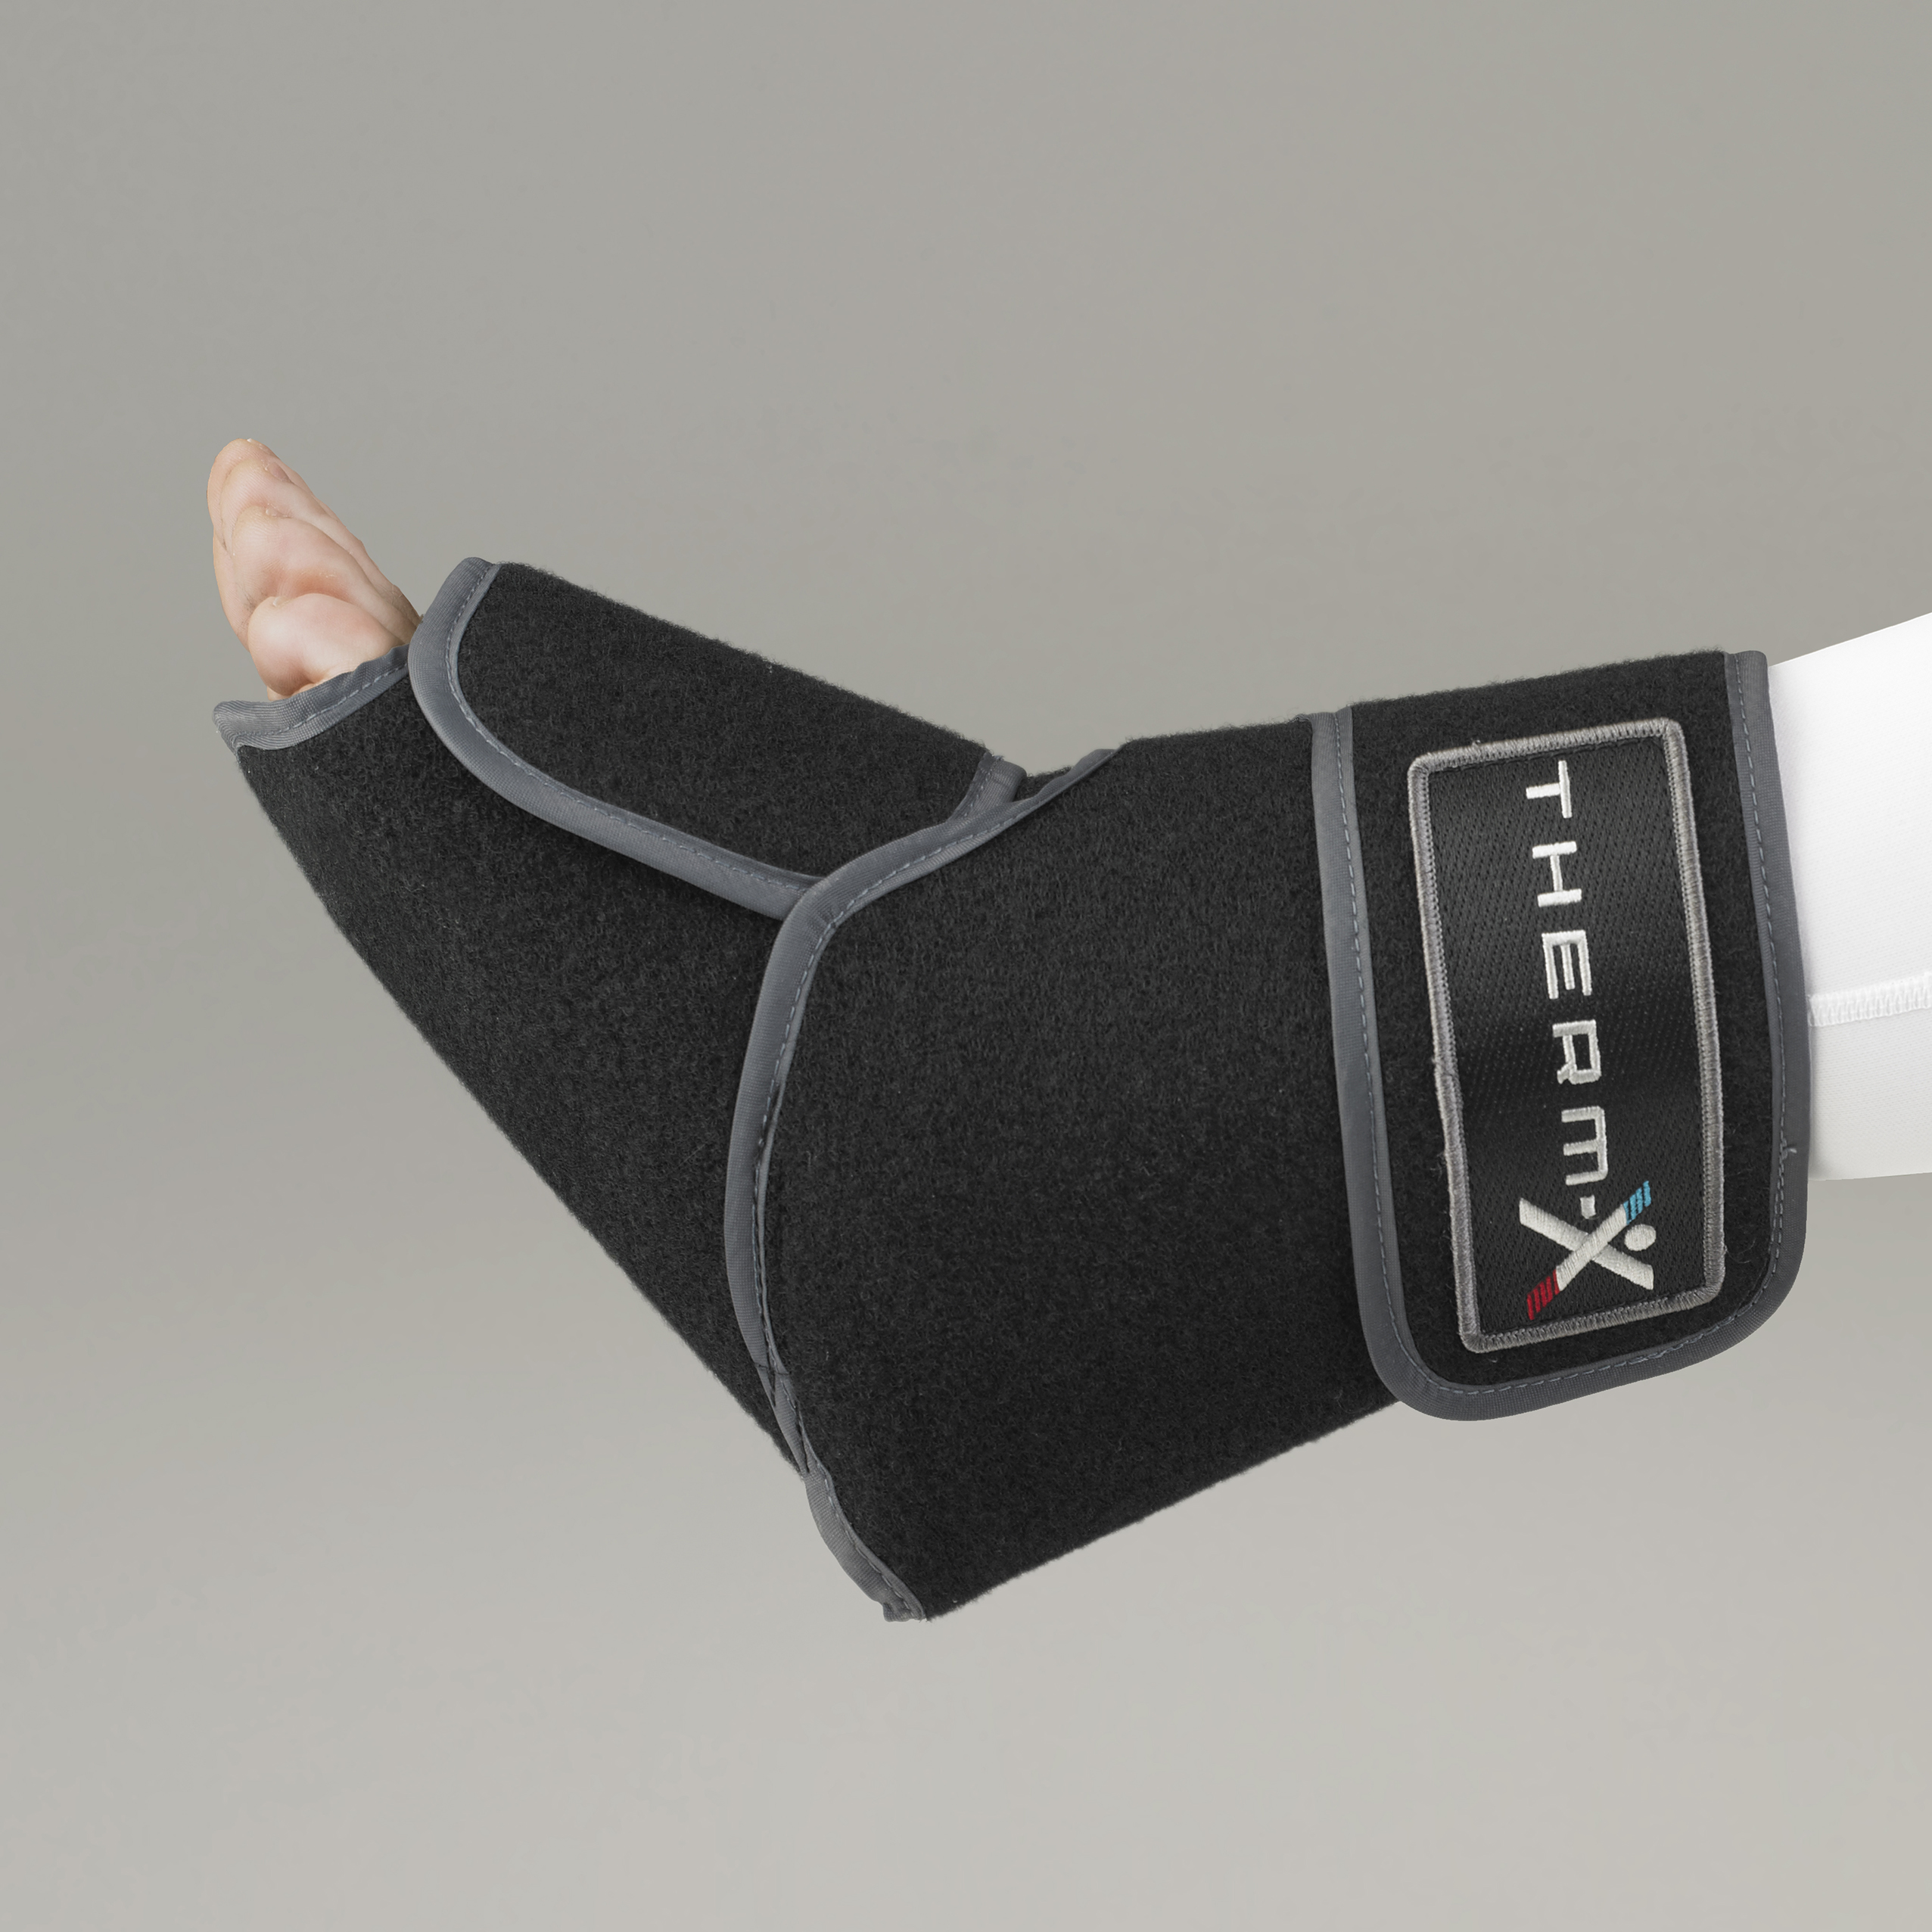 Therm-X: Easily Portable Therapy - Heat, Cold, Contrast & Compression ...